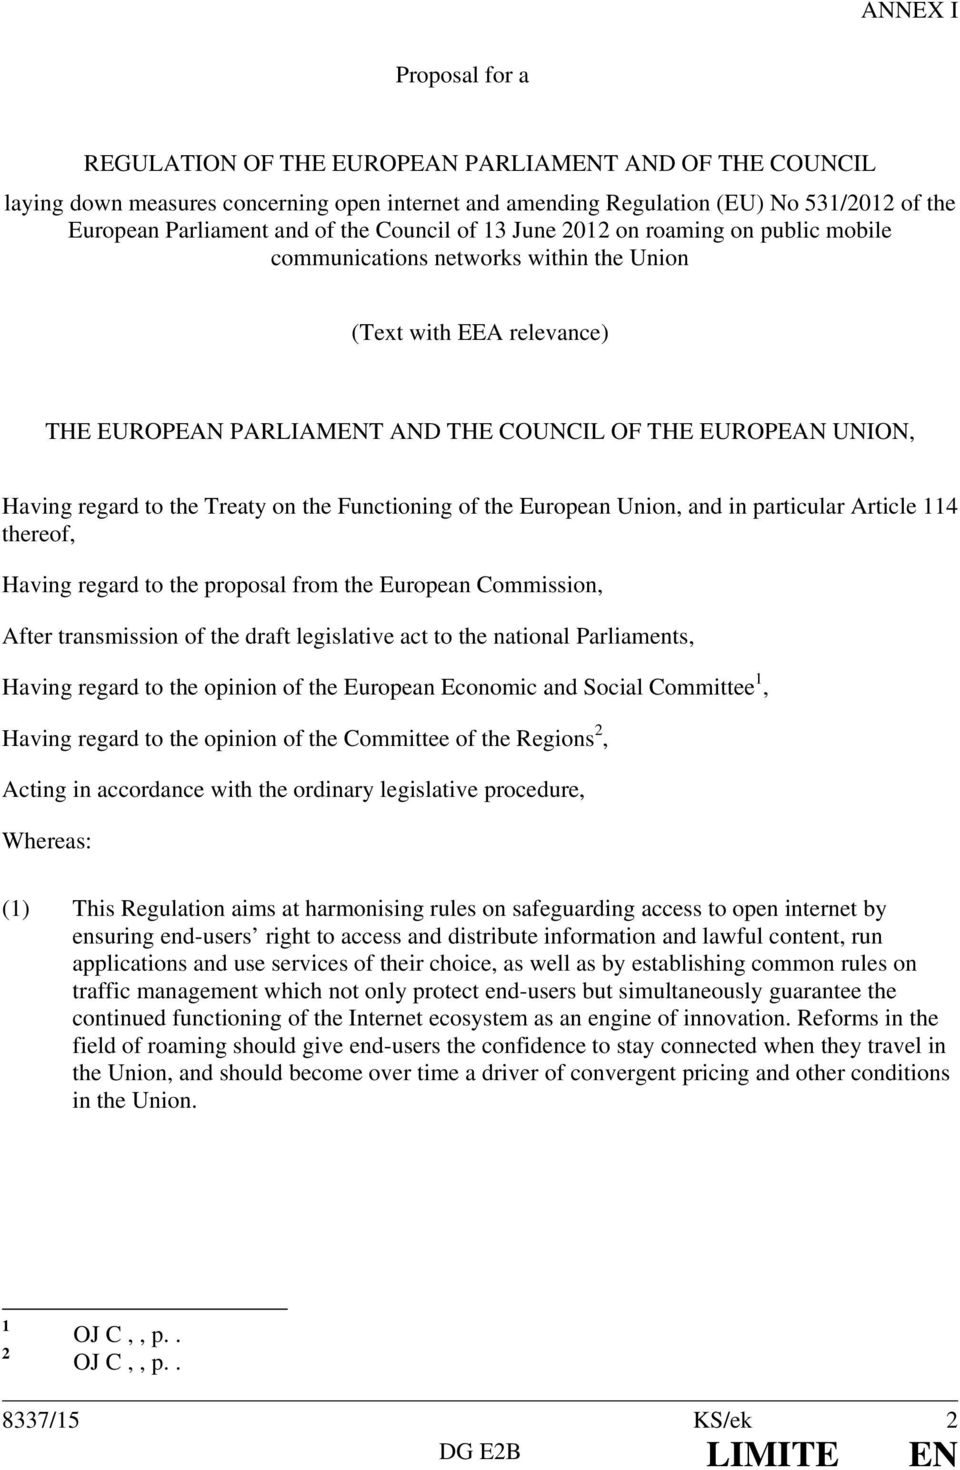 regard to the Treaty on the Functioning of the European Union, and in particular Article 114 thereof, Having regard to the proposal from the European Commission, After transmission of the draft